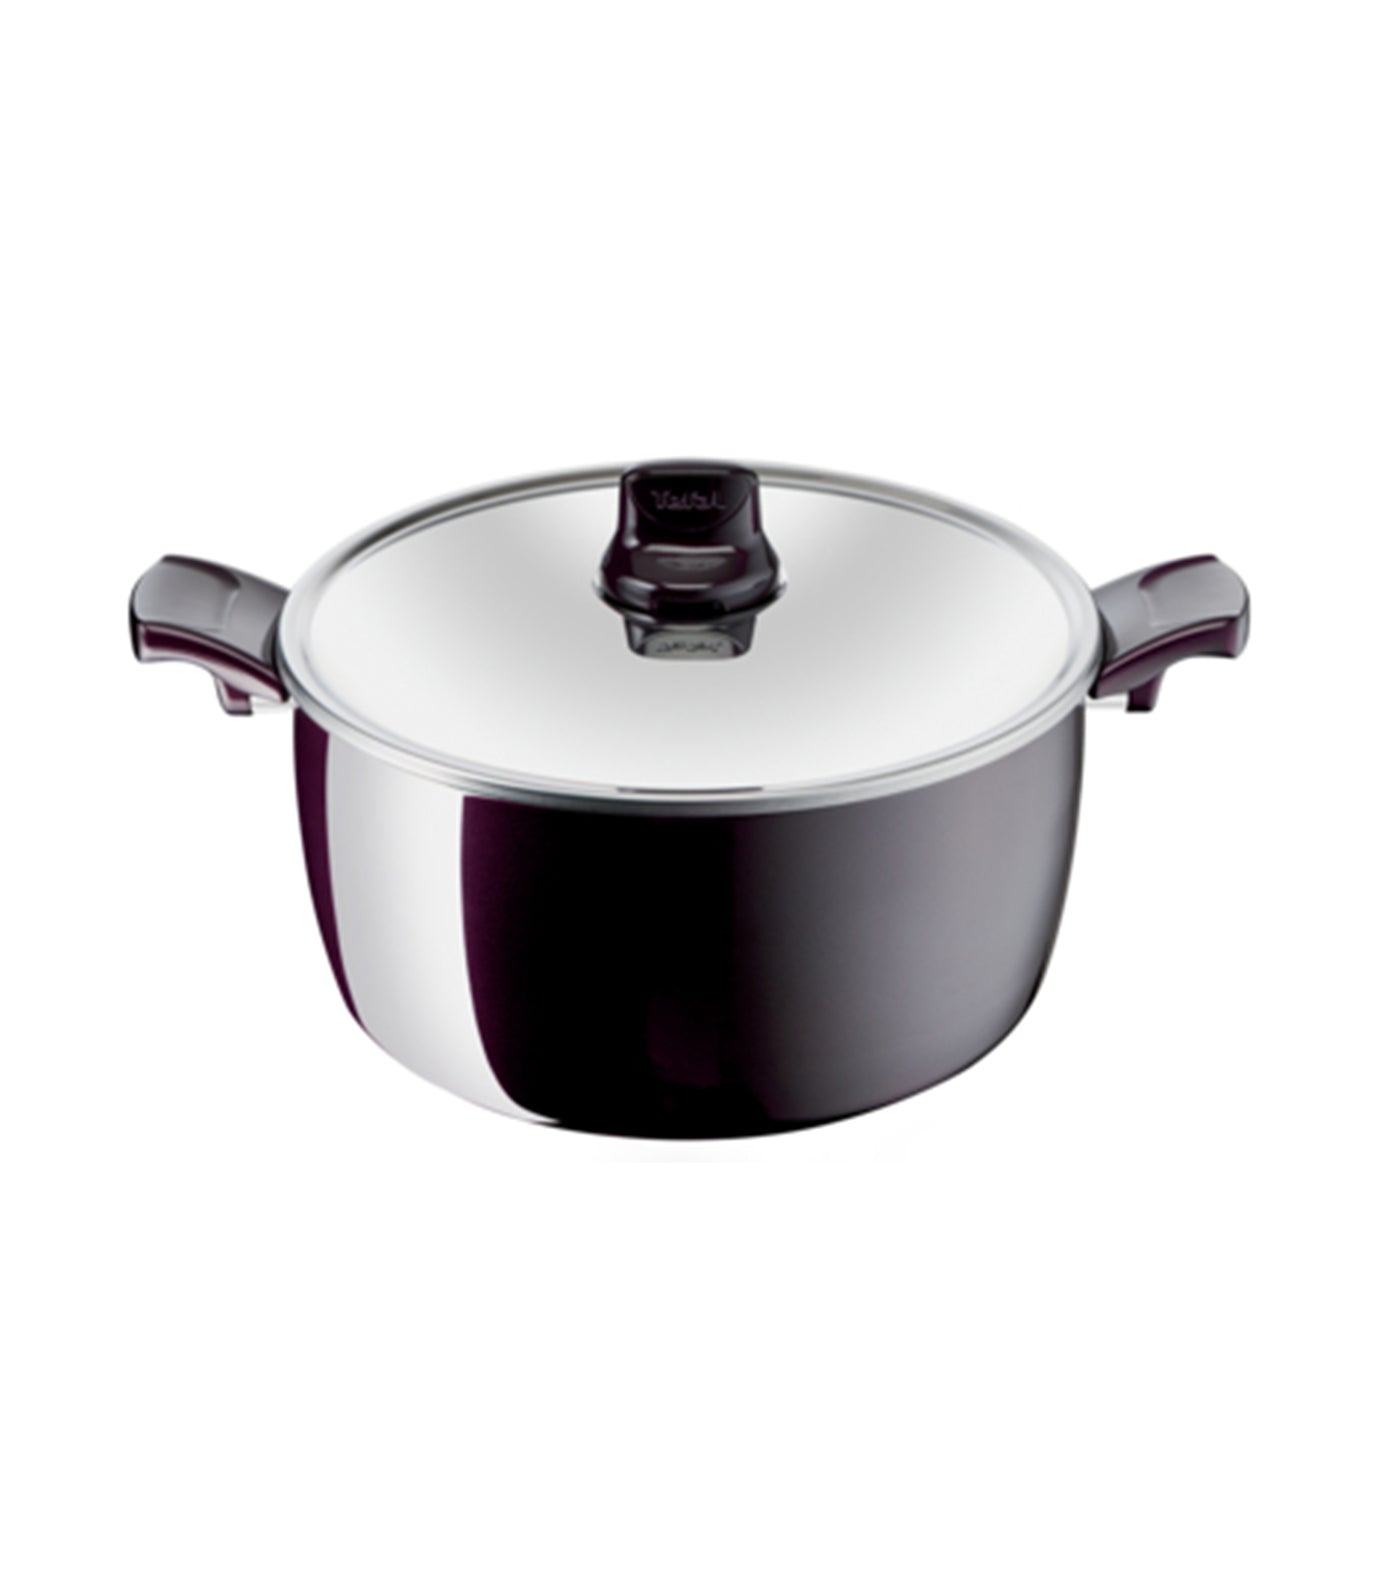 Tefal Resist Intense Stewpot with Lid - 30cm